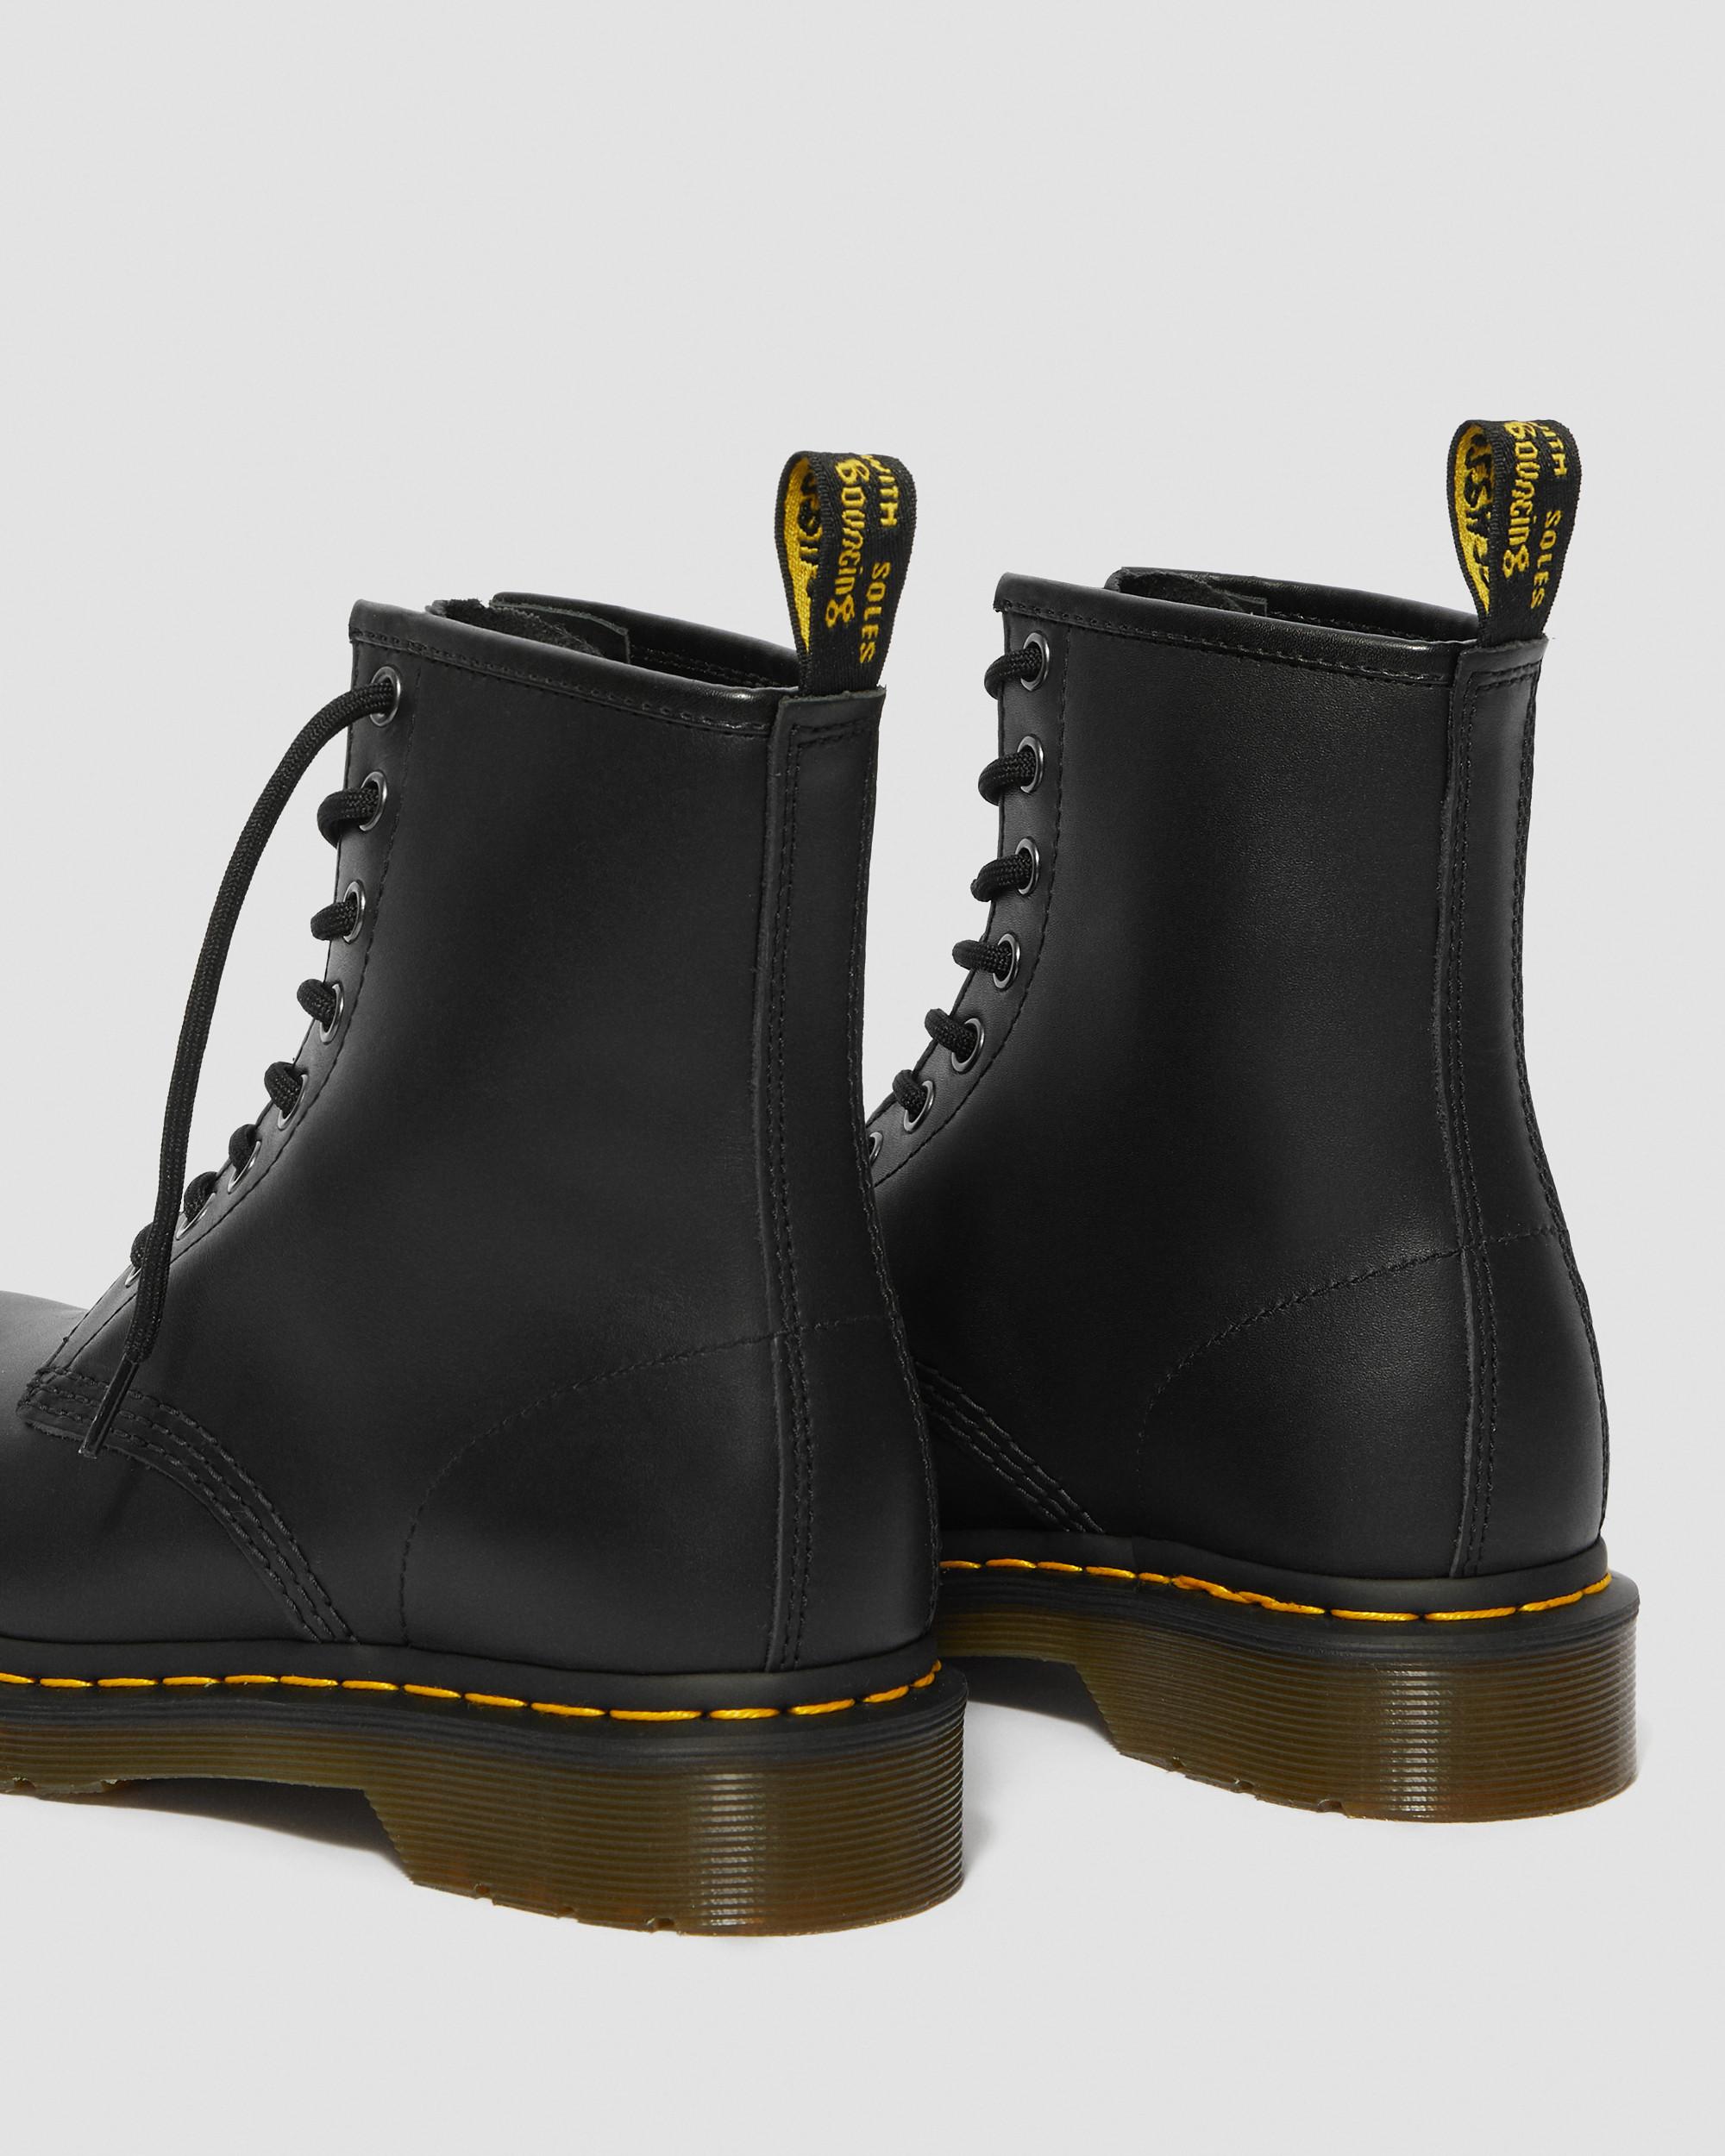 DR MARTENS 1460 Women's Nappa Leather Lace Up Boots